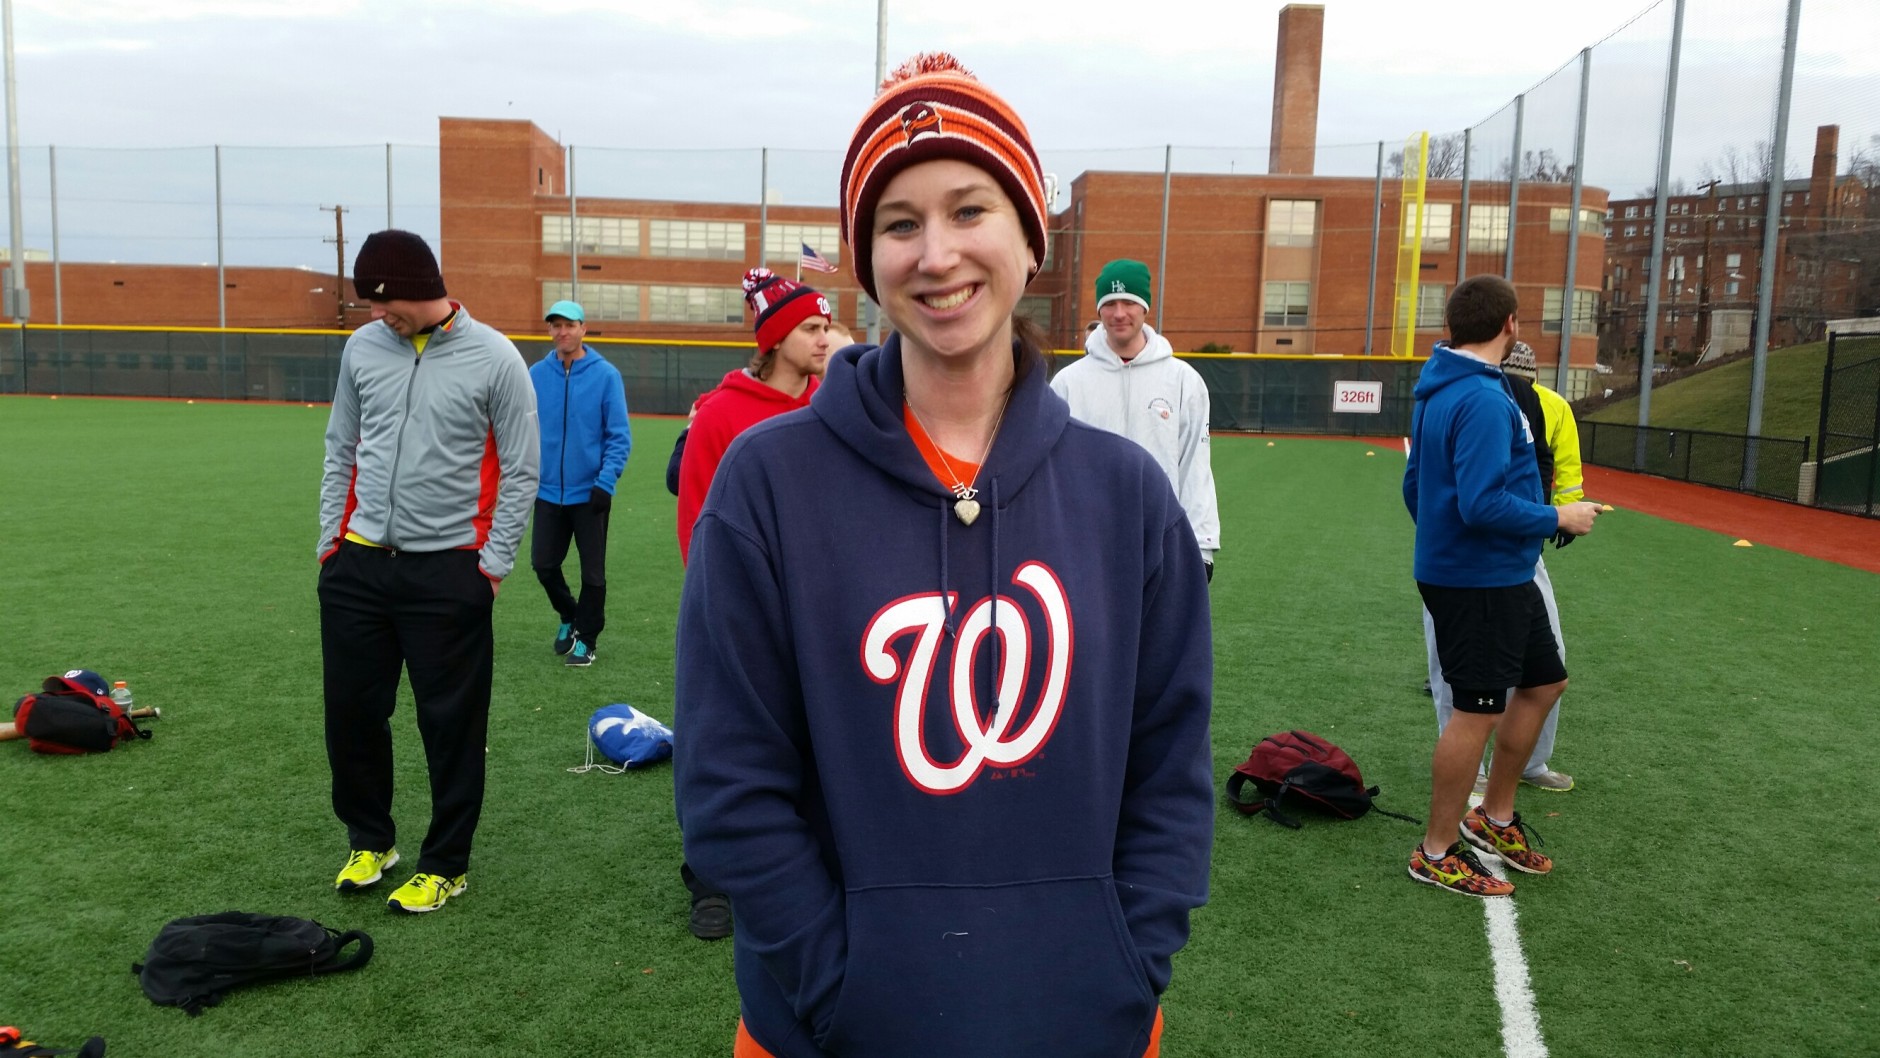 Erin, from Woodbridge, was the only female contestant in this weekend's Presidents Race auditions. (WTOP/Kathy Stewart)